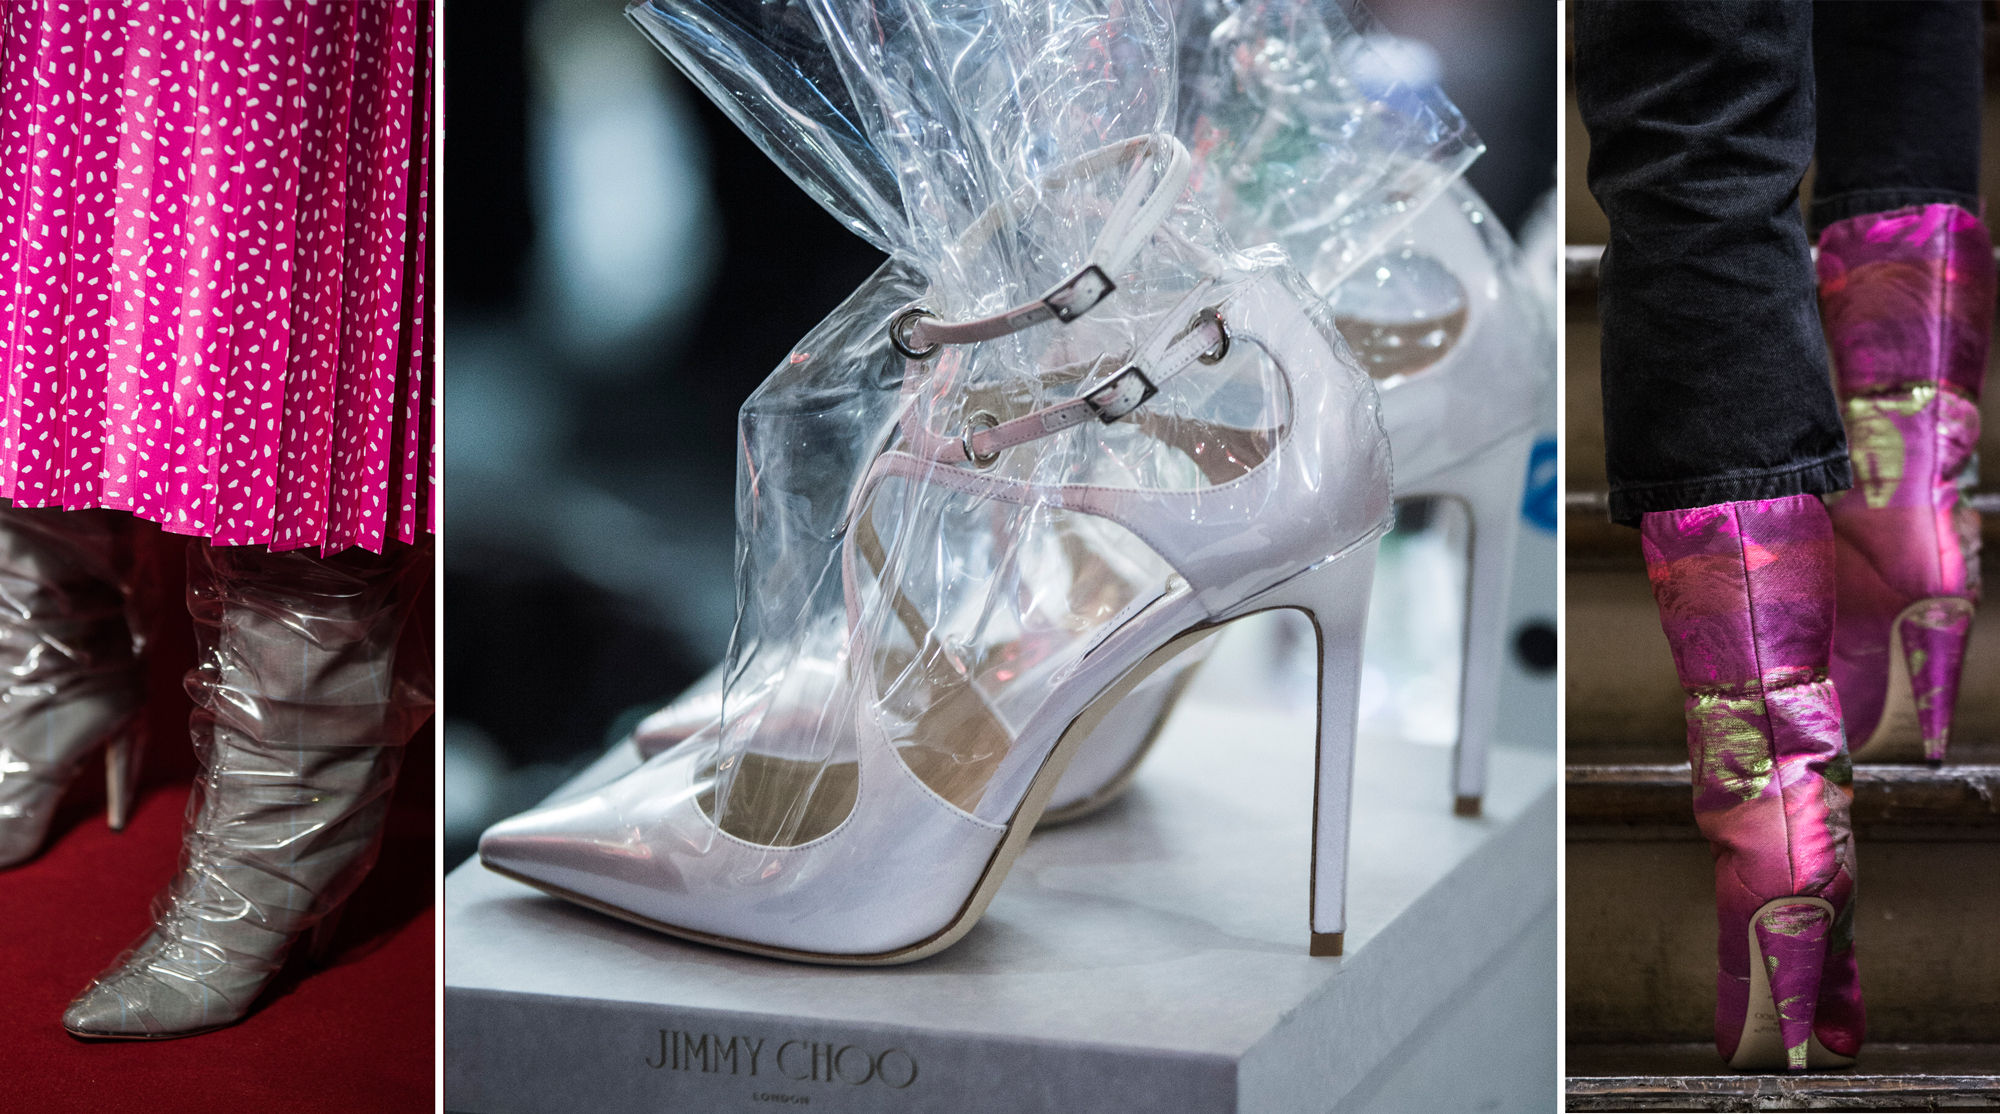 Off-White Jimmy Choo collaboration is inspired by Cinderella